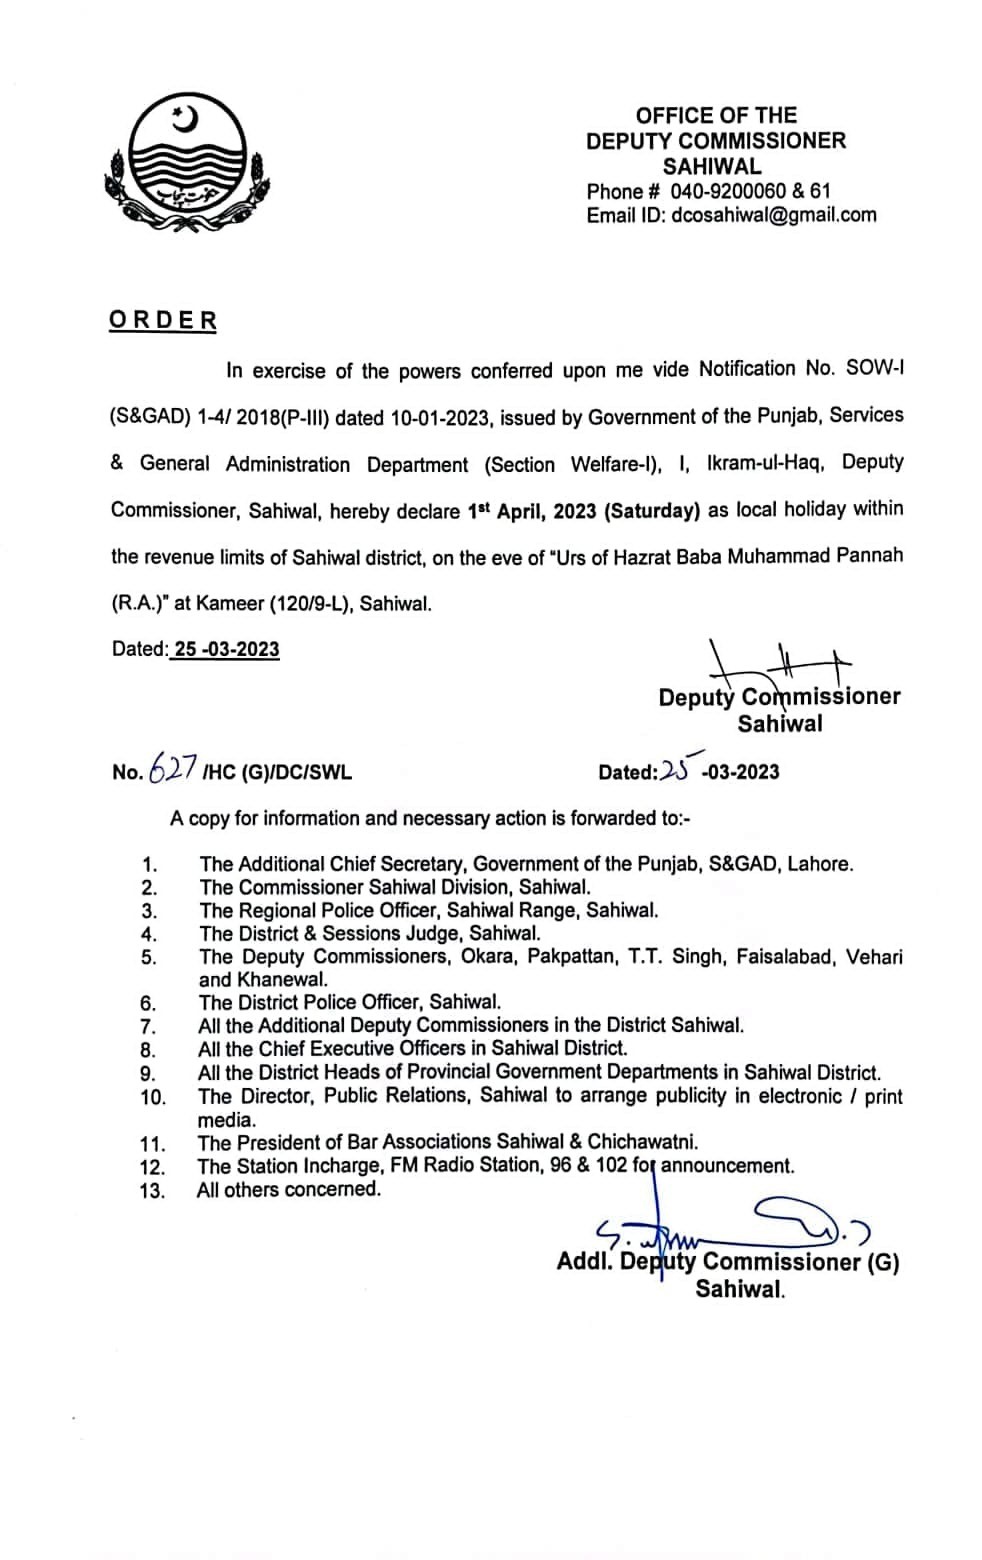 Notification of Local Holiday on 1st April 2023 in District Sahiwal